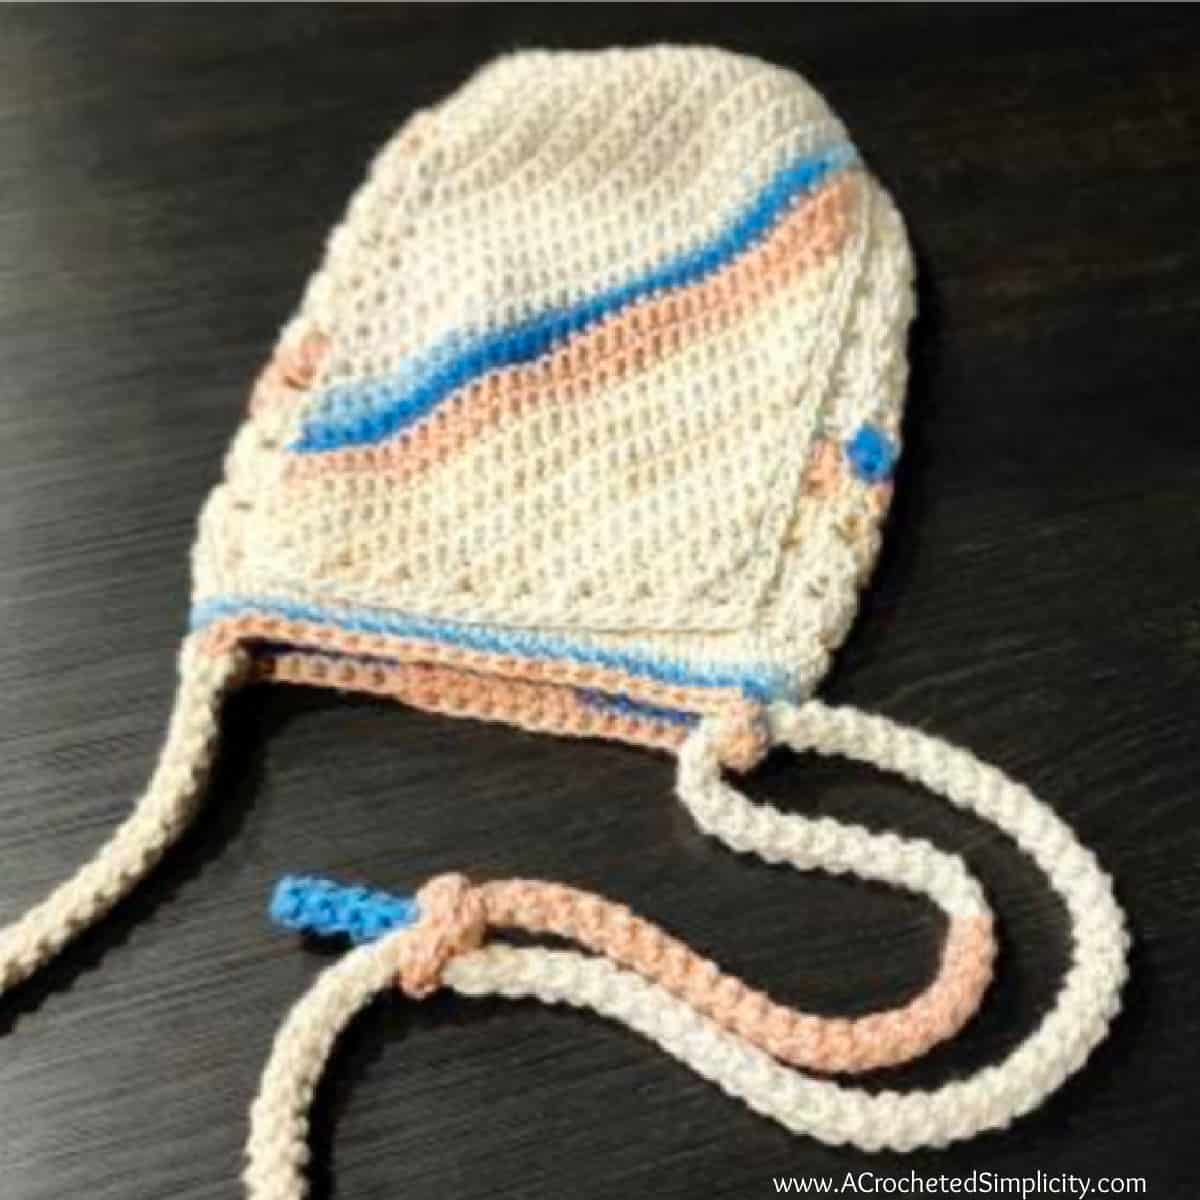 Tutorial photo showing how to secure the sliding knot for the crochet adjustable strap.